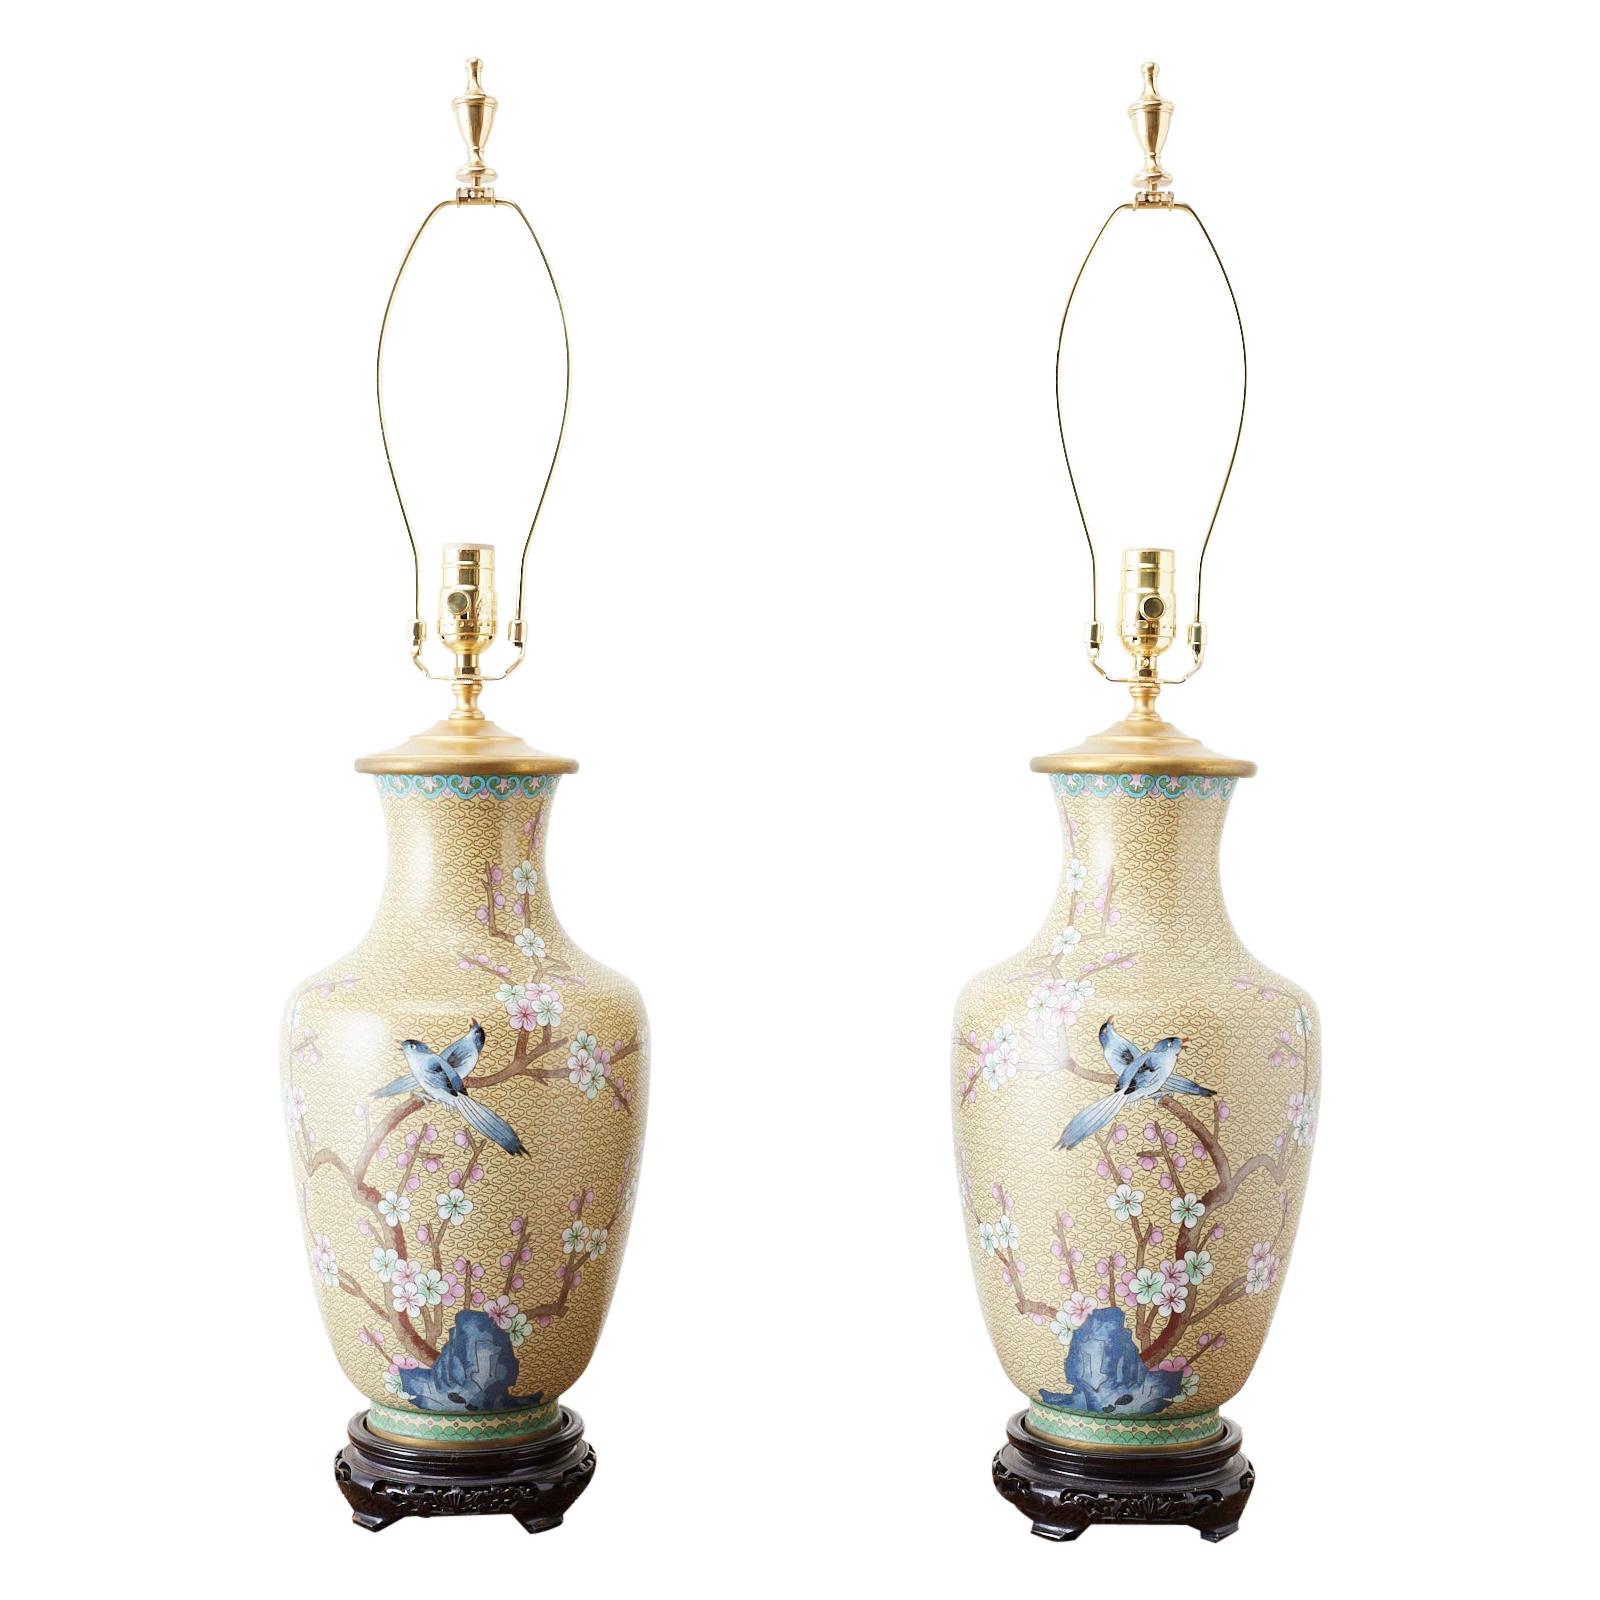 Pair of Chinese Cloisonne Floral Vases Mounted as Lamps